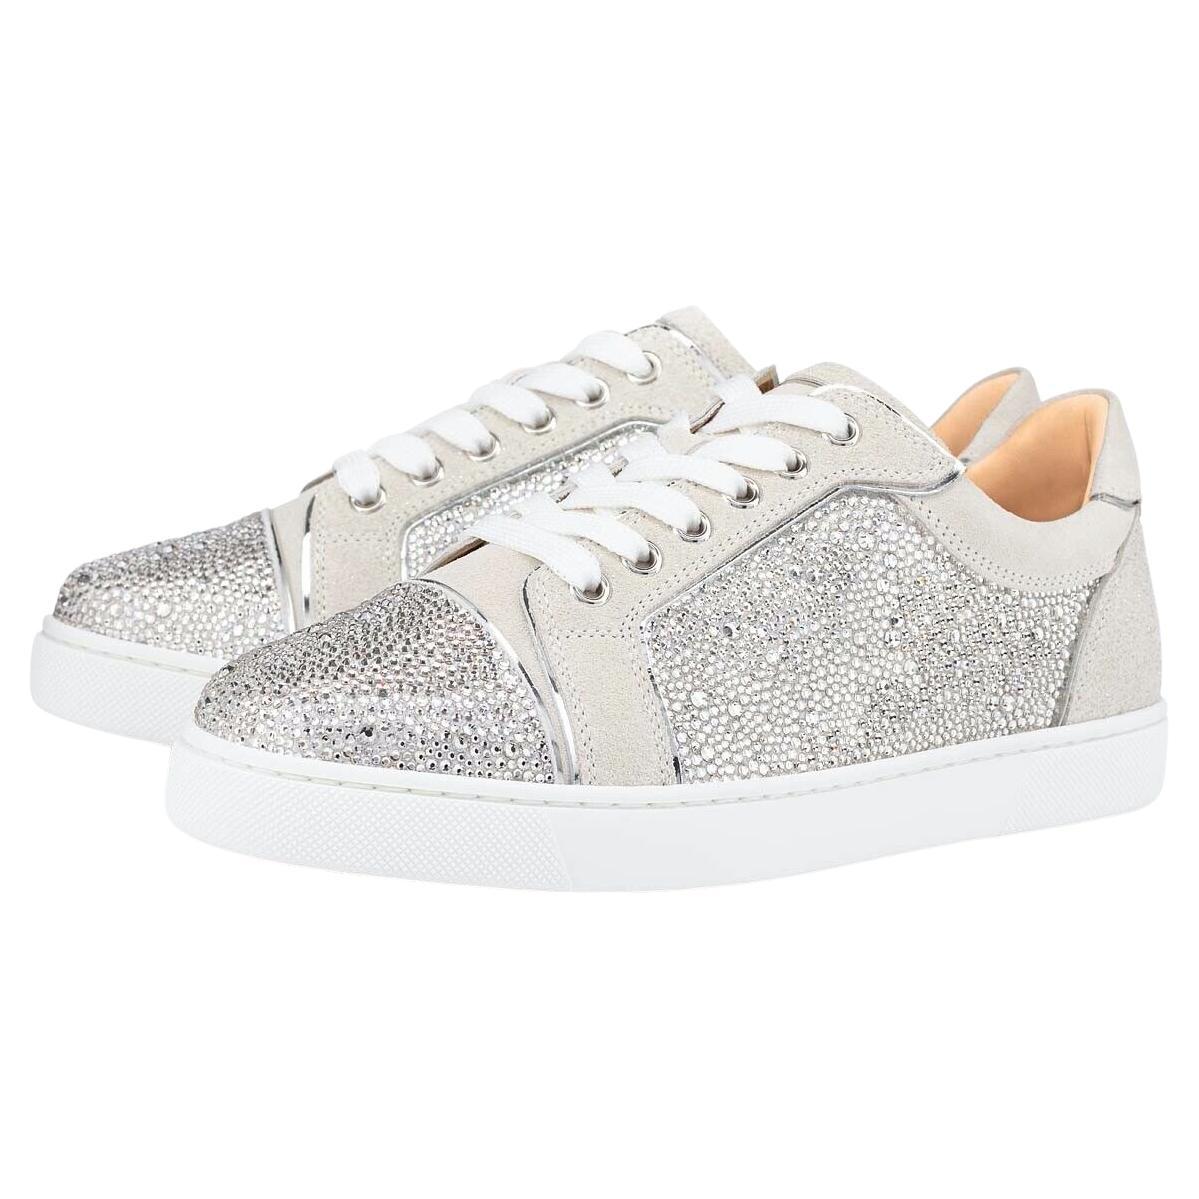 Christian Louboutin Viera Chausssures plates Lune Grey Crystal Sneakers Taille 41 en vente